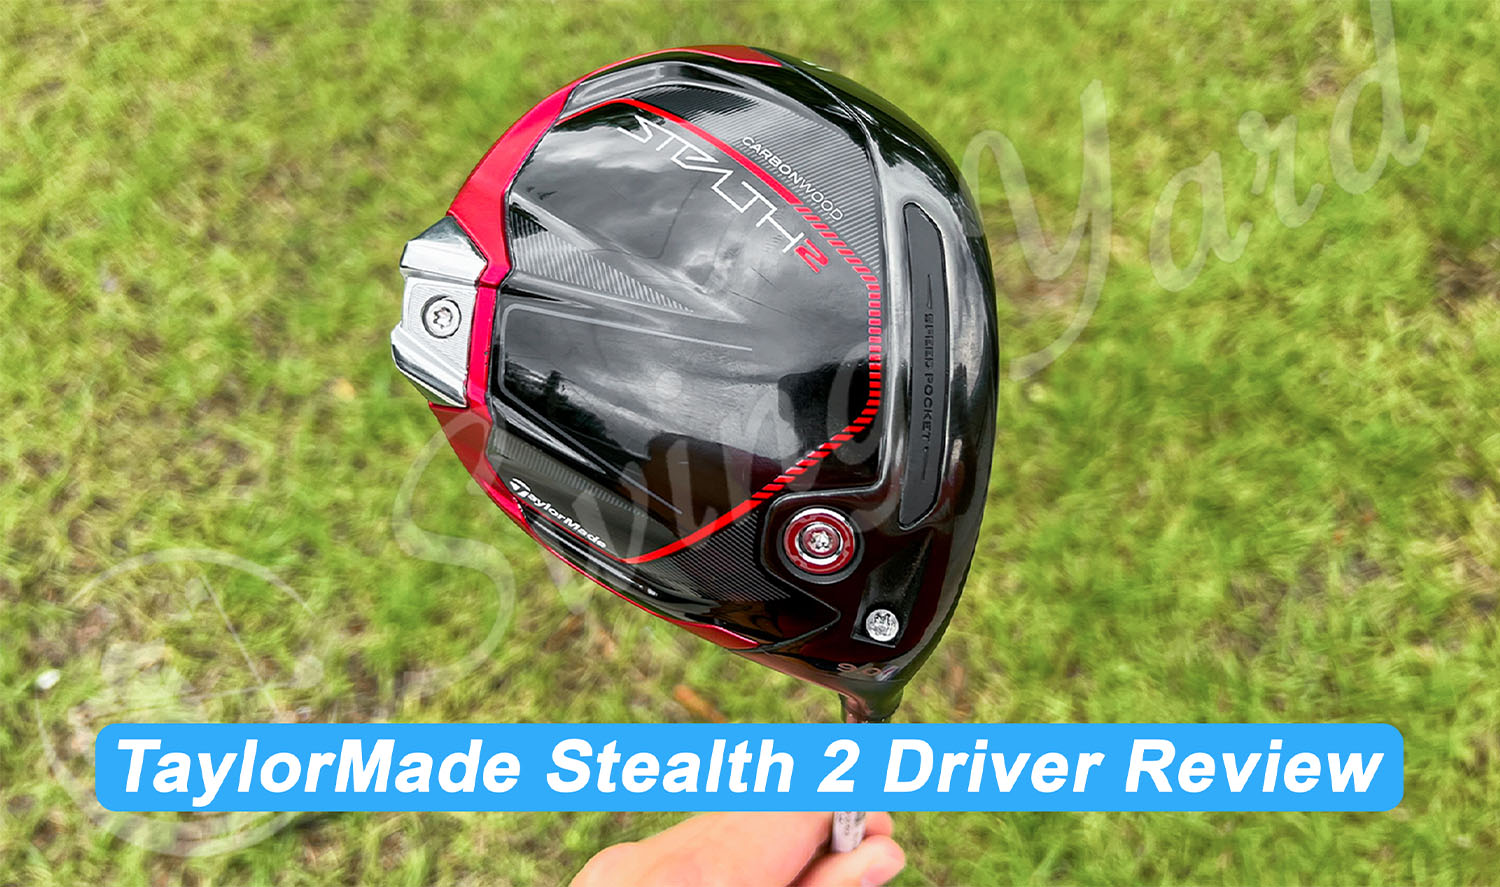 My taylormade stealth 2 driver review